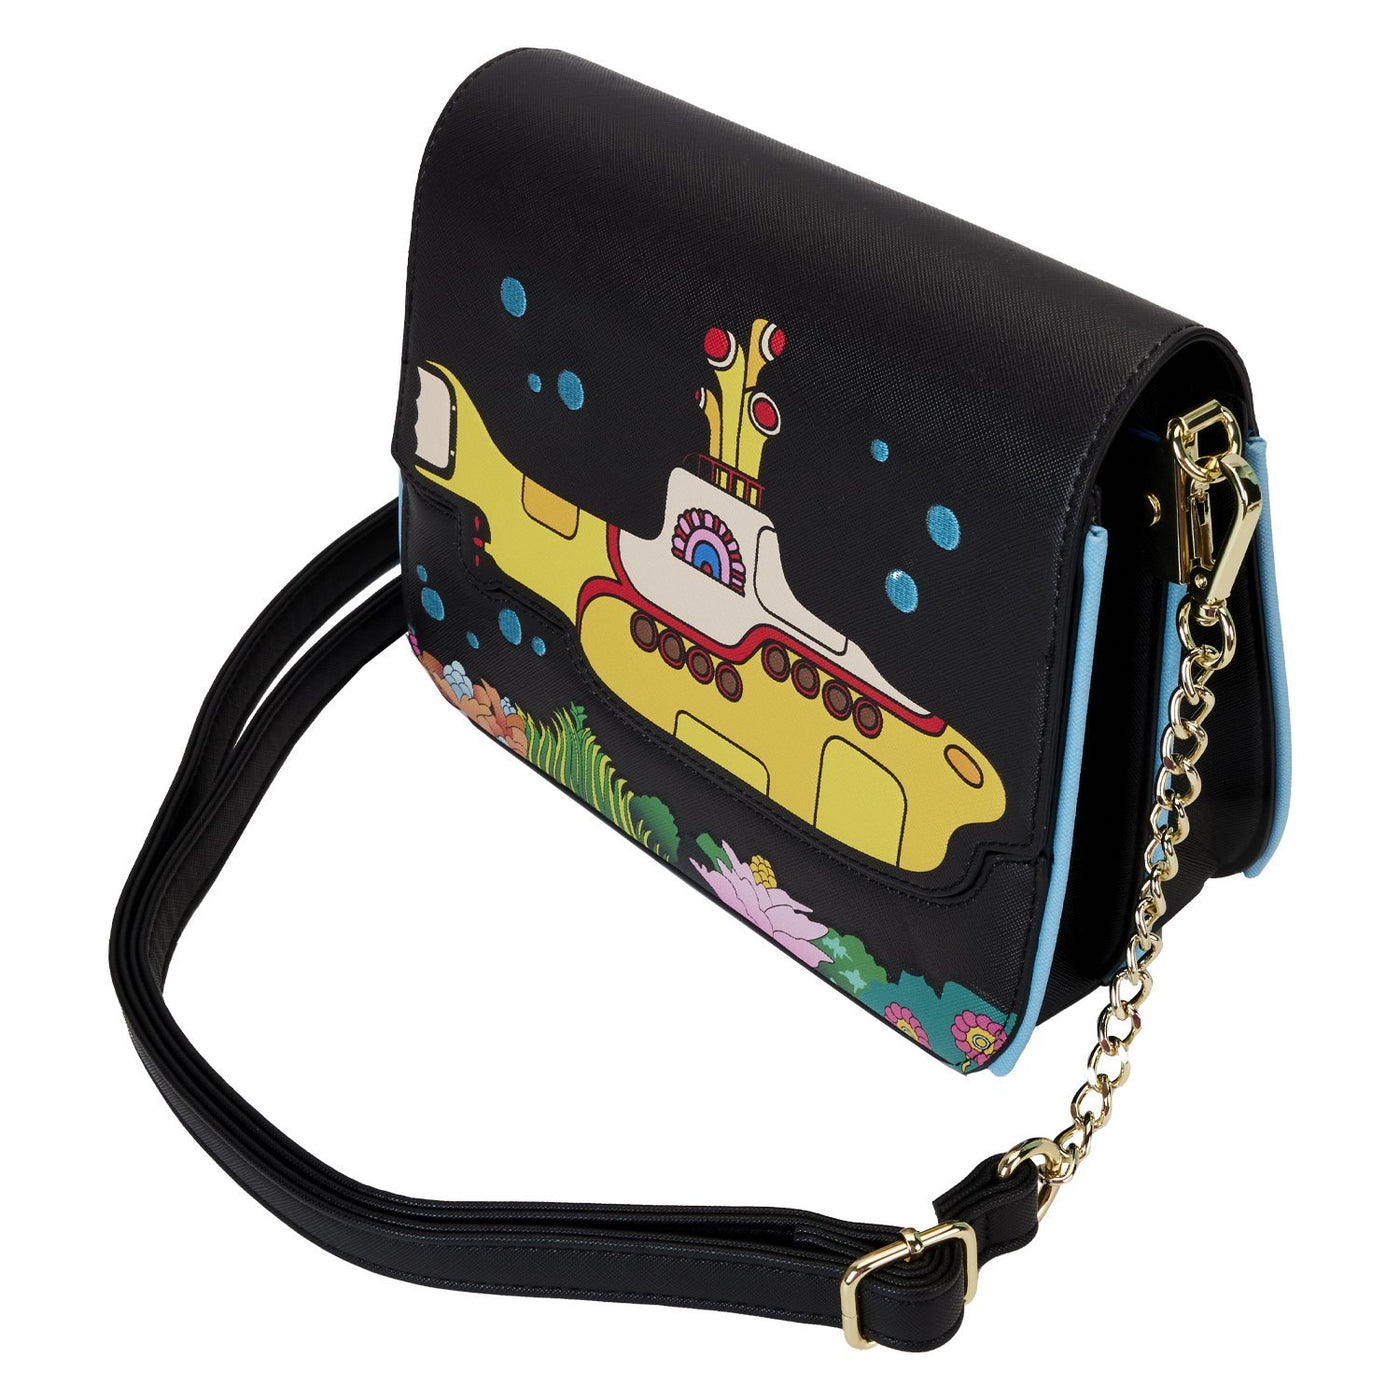 Loungefly The Beatles Yellow Submarine Flap Pocket Crossbody - Top View